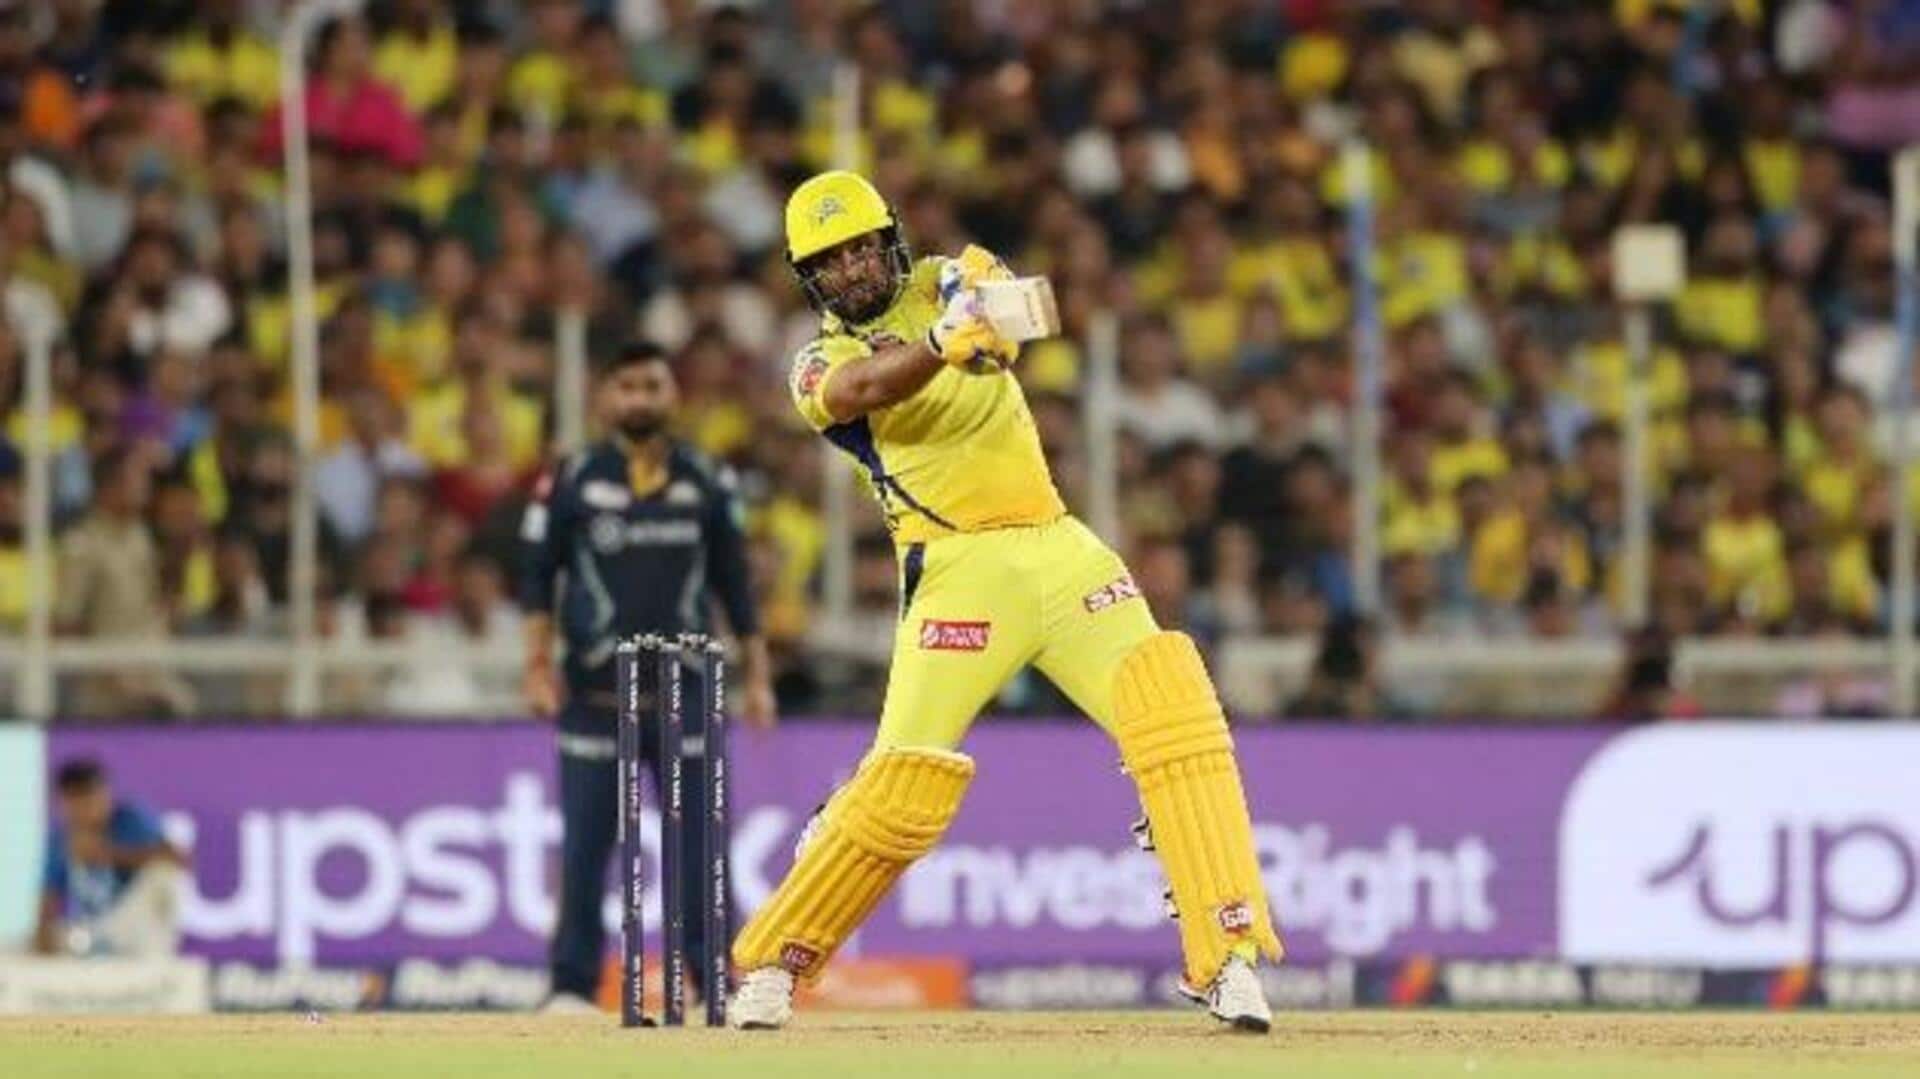 Ambati Rayudu joins CPL outfit Patriots: Decoding his T20 stats